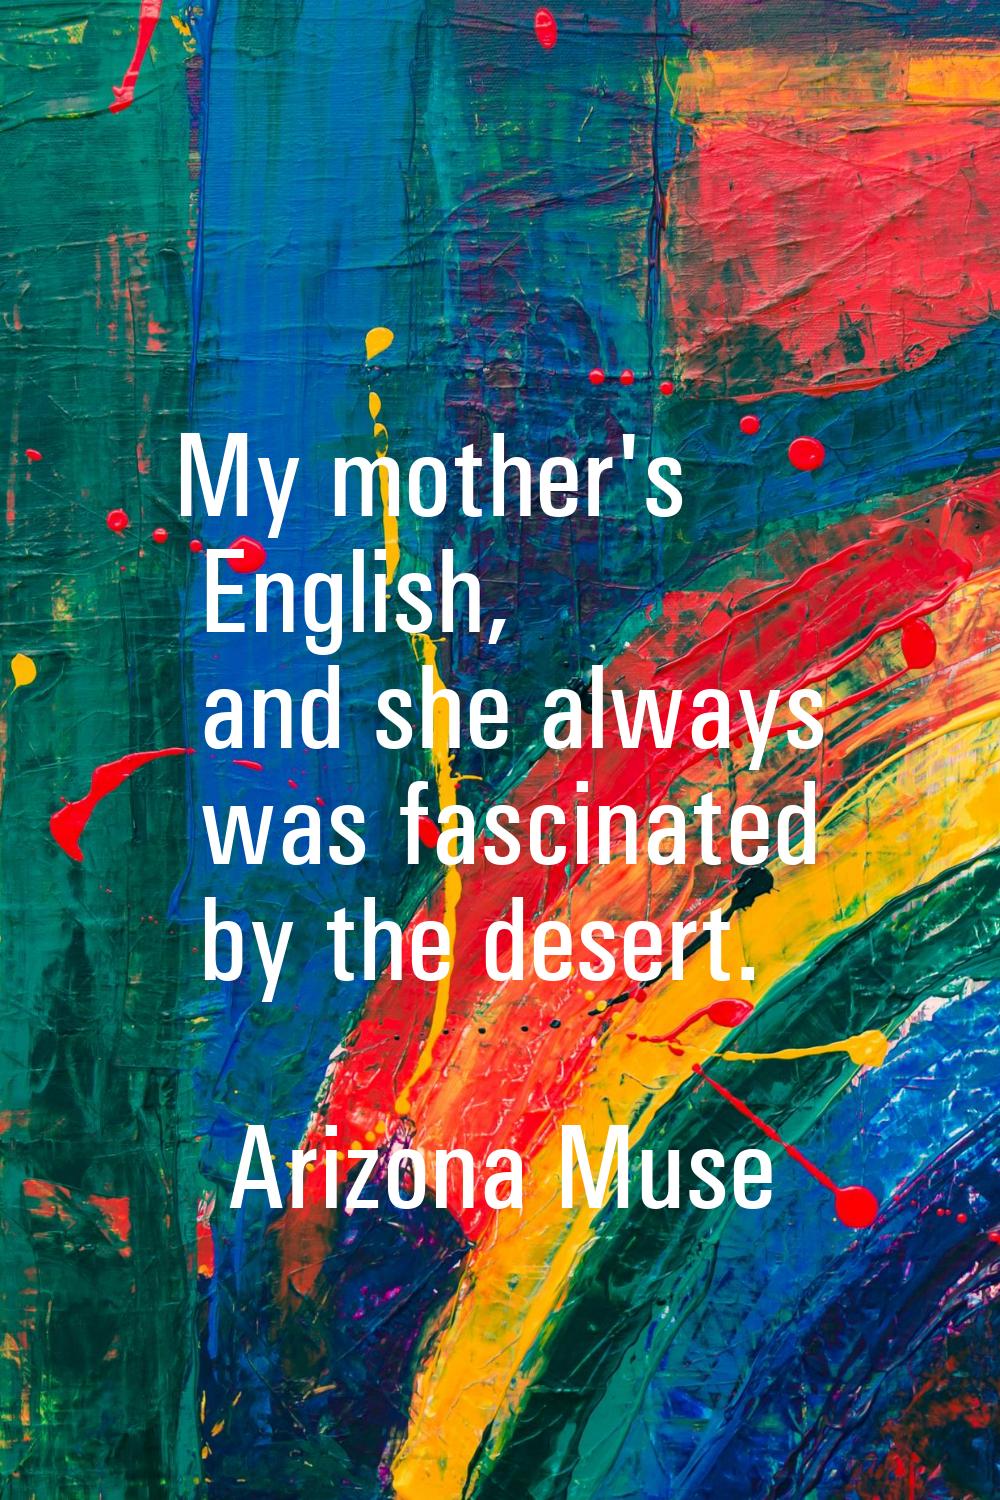 My mother's English, and she always was fascinated by the desert.